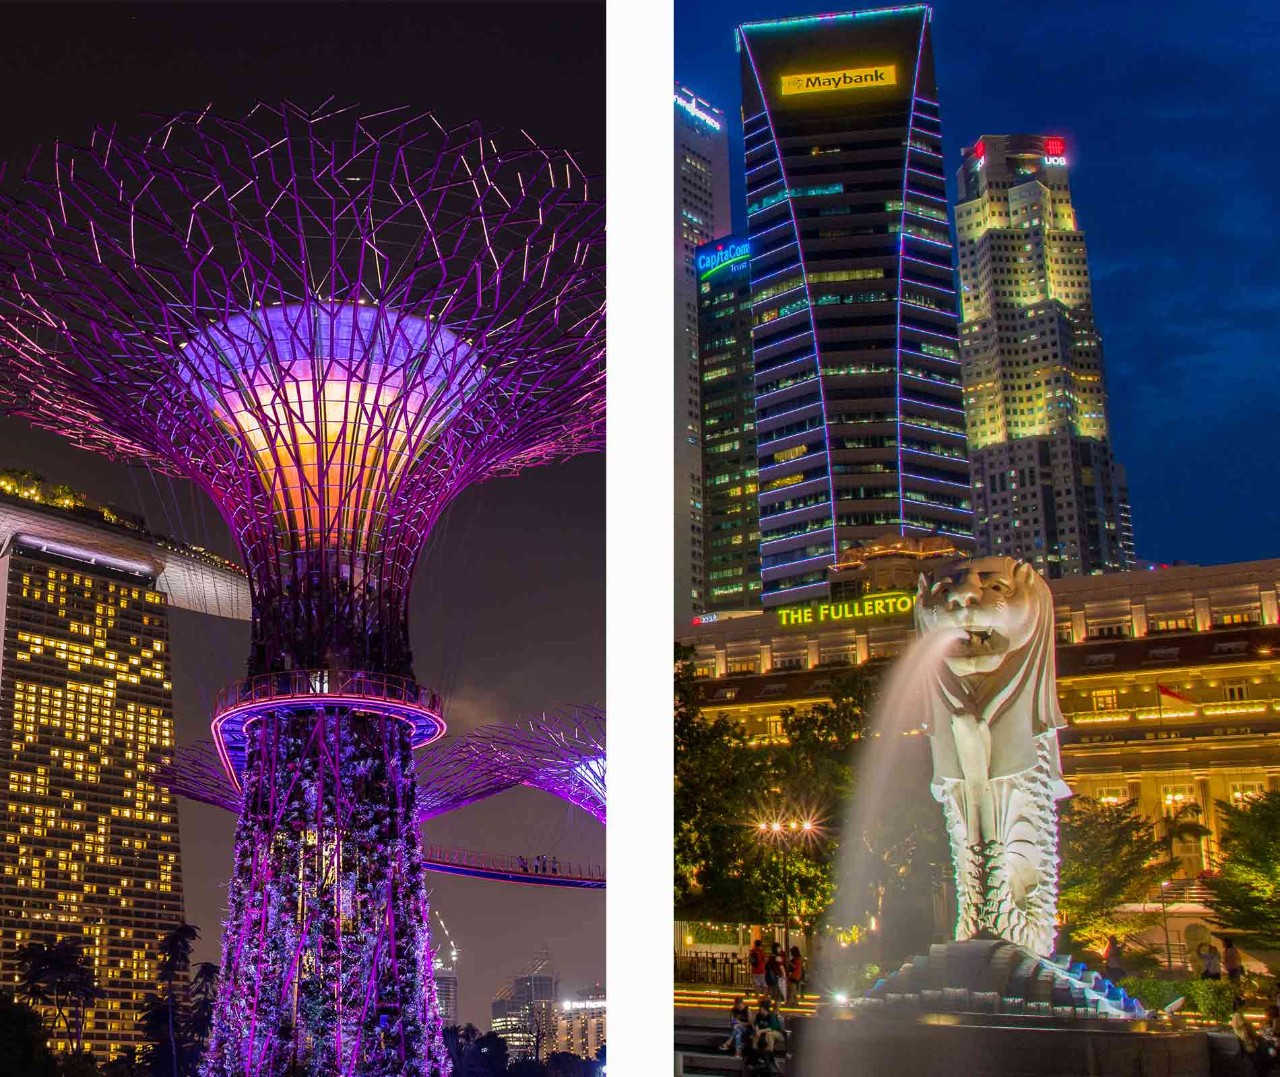 Top Singapore attractions, Merlion and Gardens by the Bay, around Marina Bay Sands